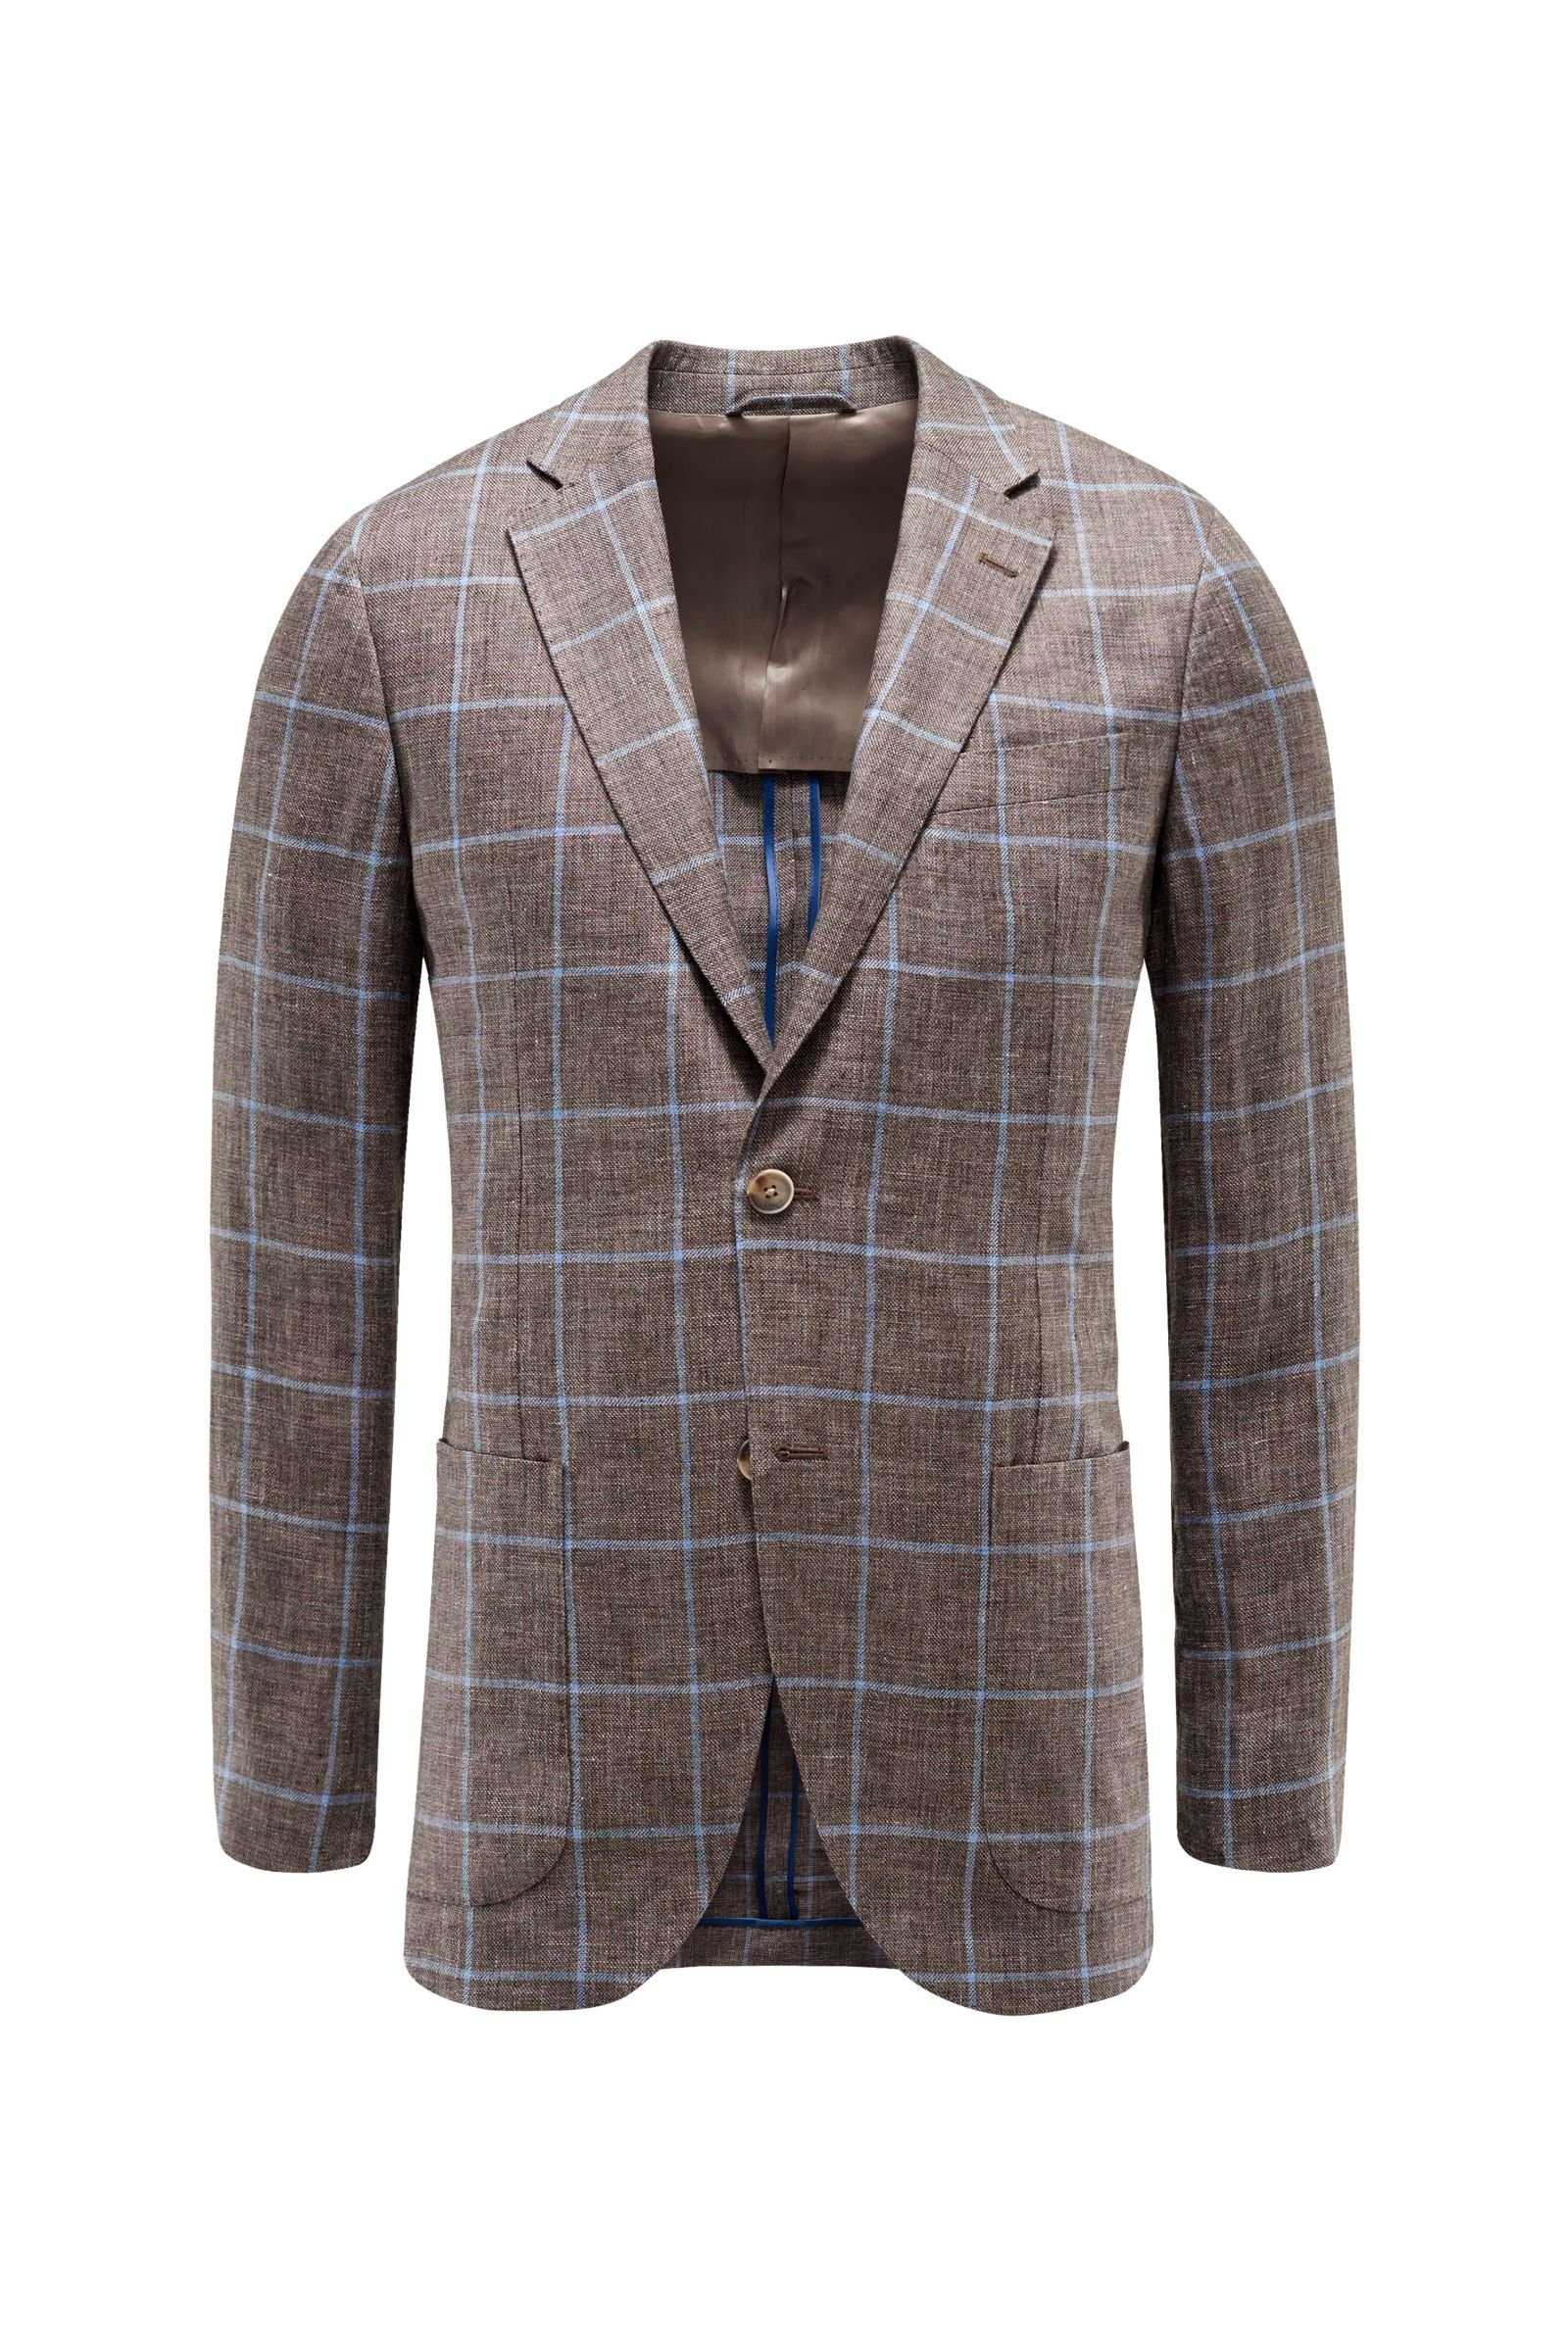 Smart-casual linen jacket grey-brown checked